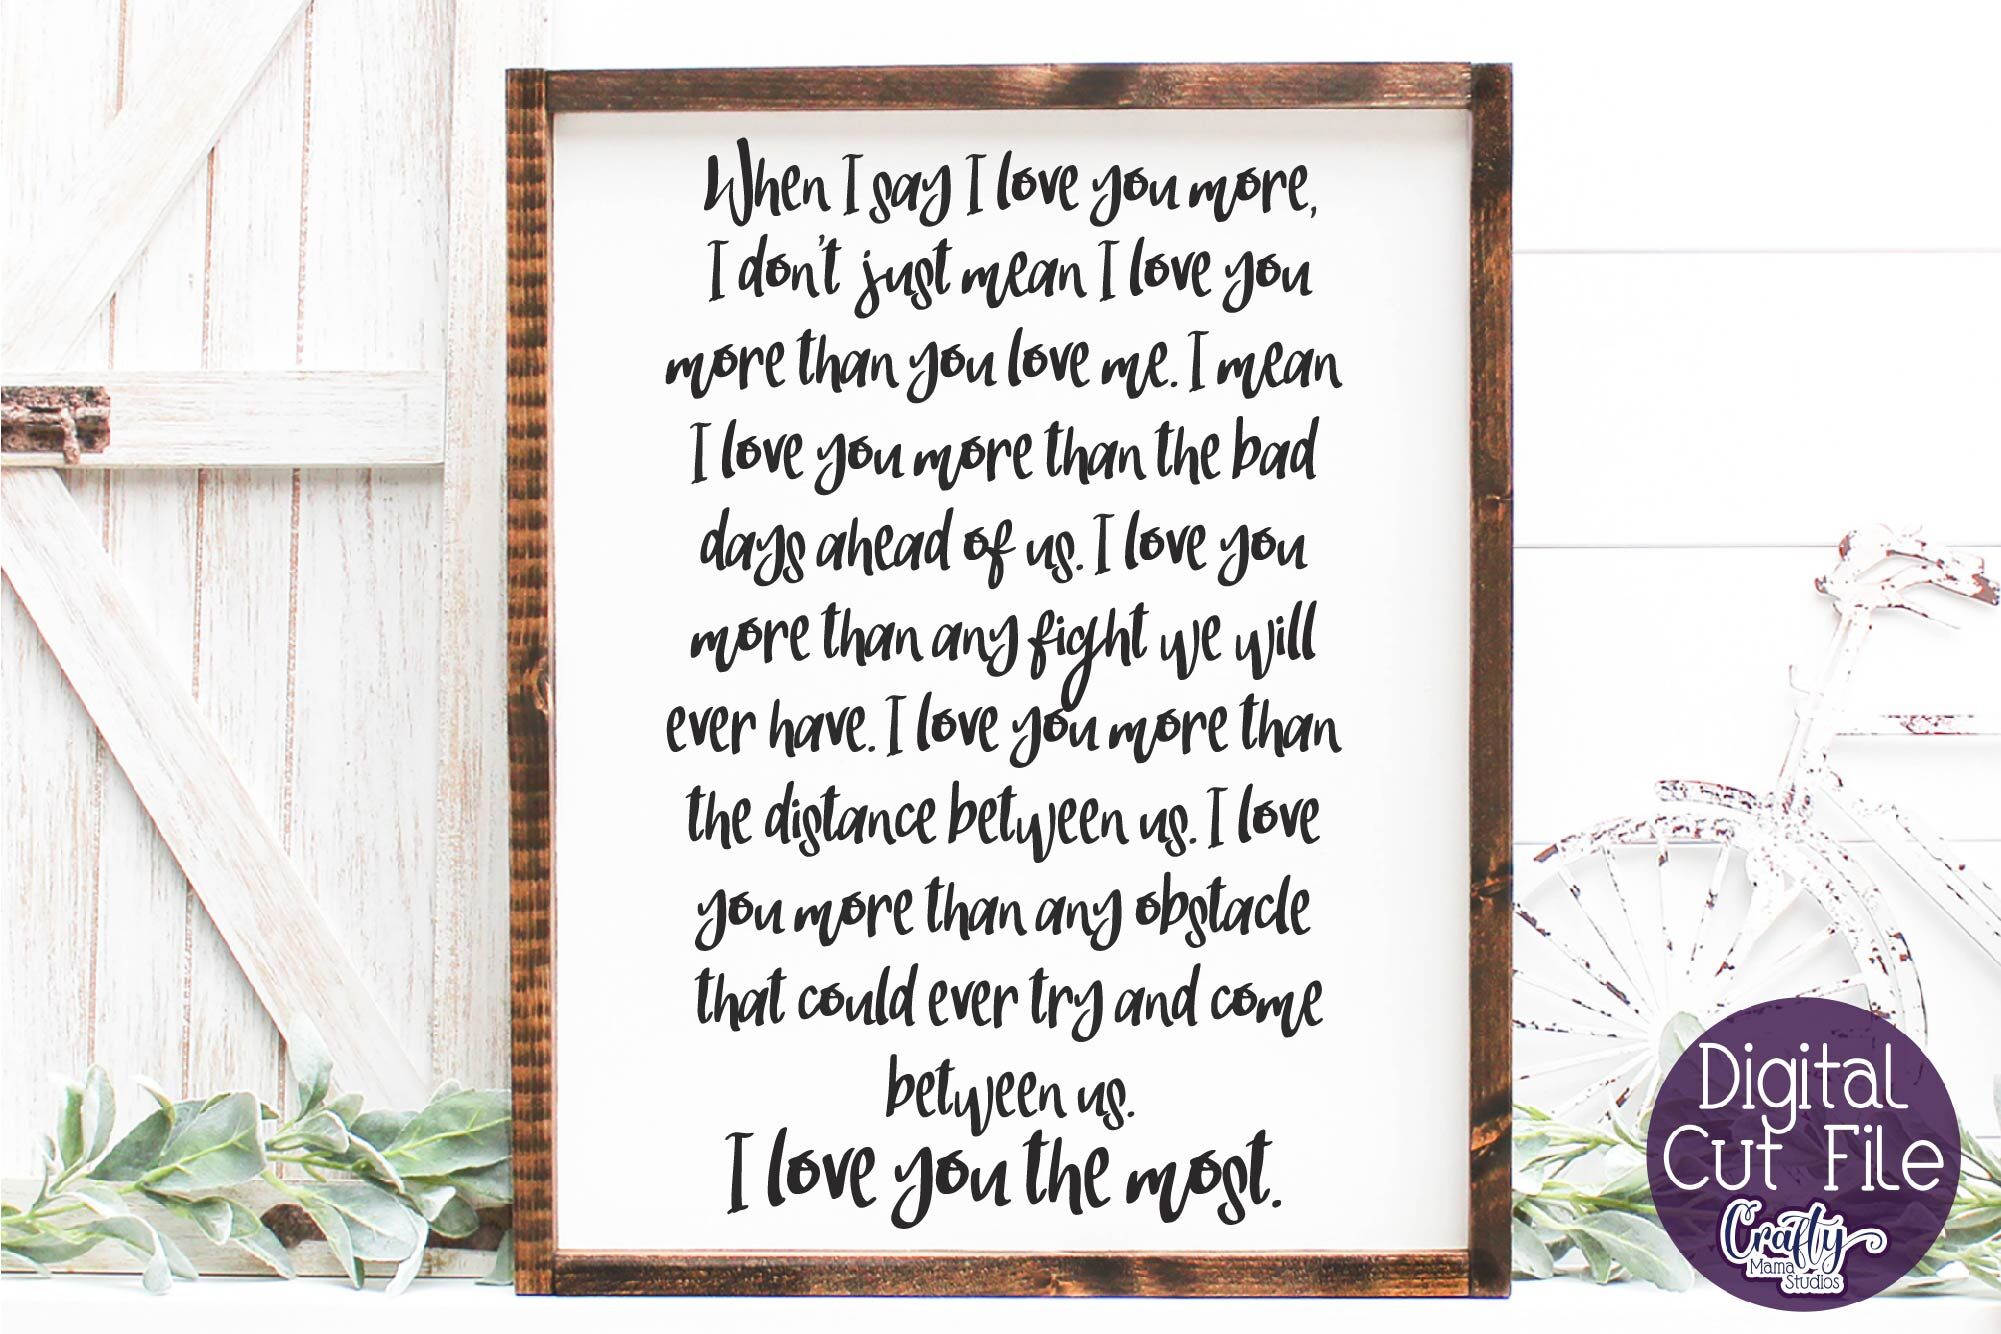 Download When I Say I Love You More Svg I Love You The Most Svg Love Svg By Crafty Mama Studios Thehungryjpeg Com